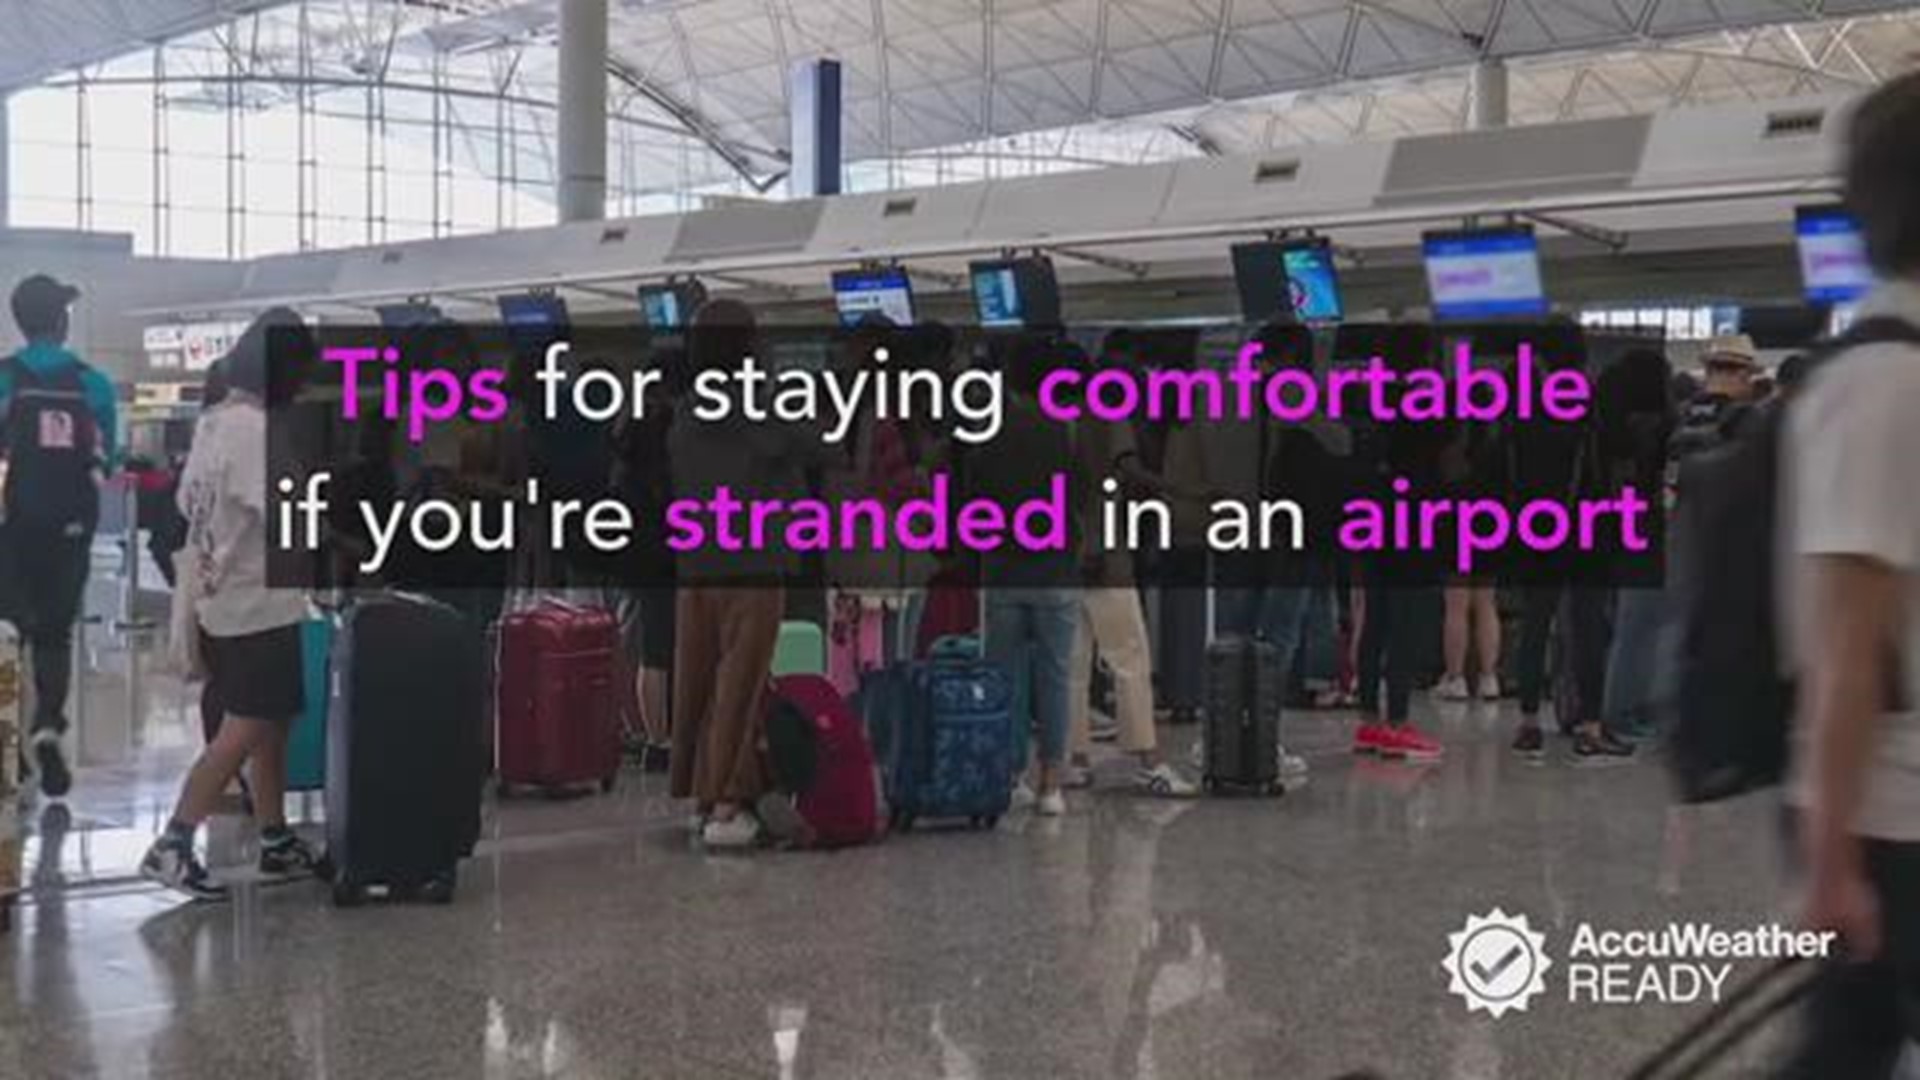 When brutal wintry conditions strike, it may mean bad news for you and your travel plans. Try these tips if you end up stuck in an airport for a while.